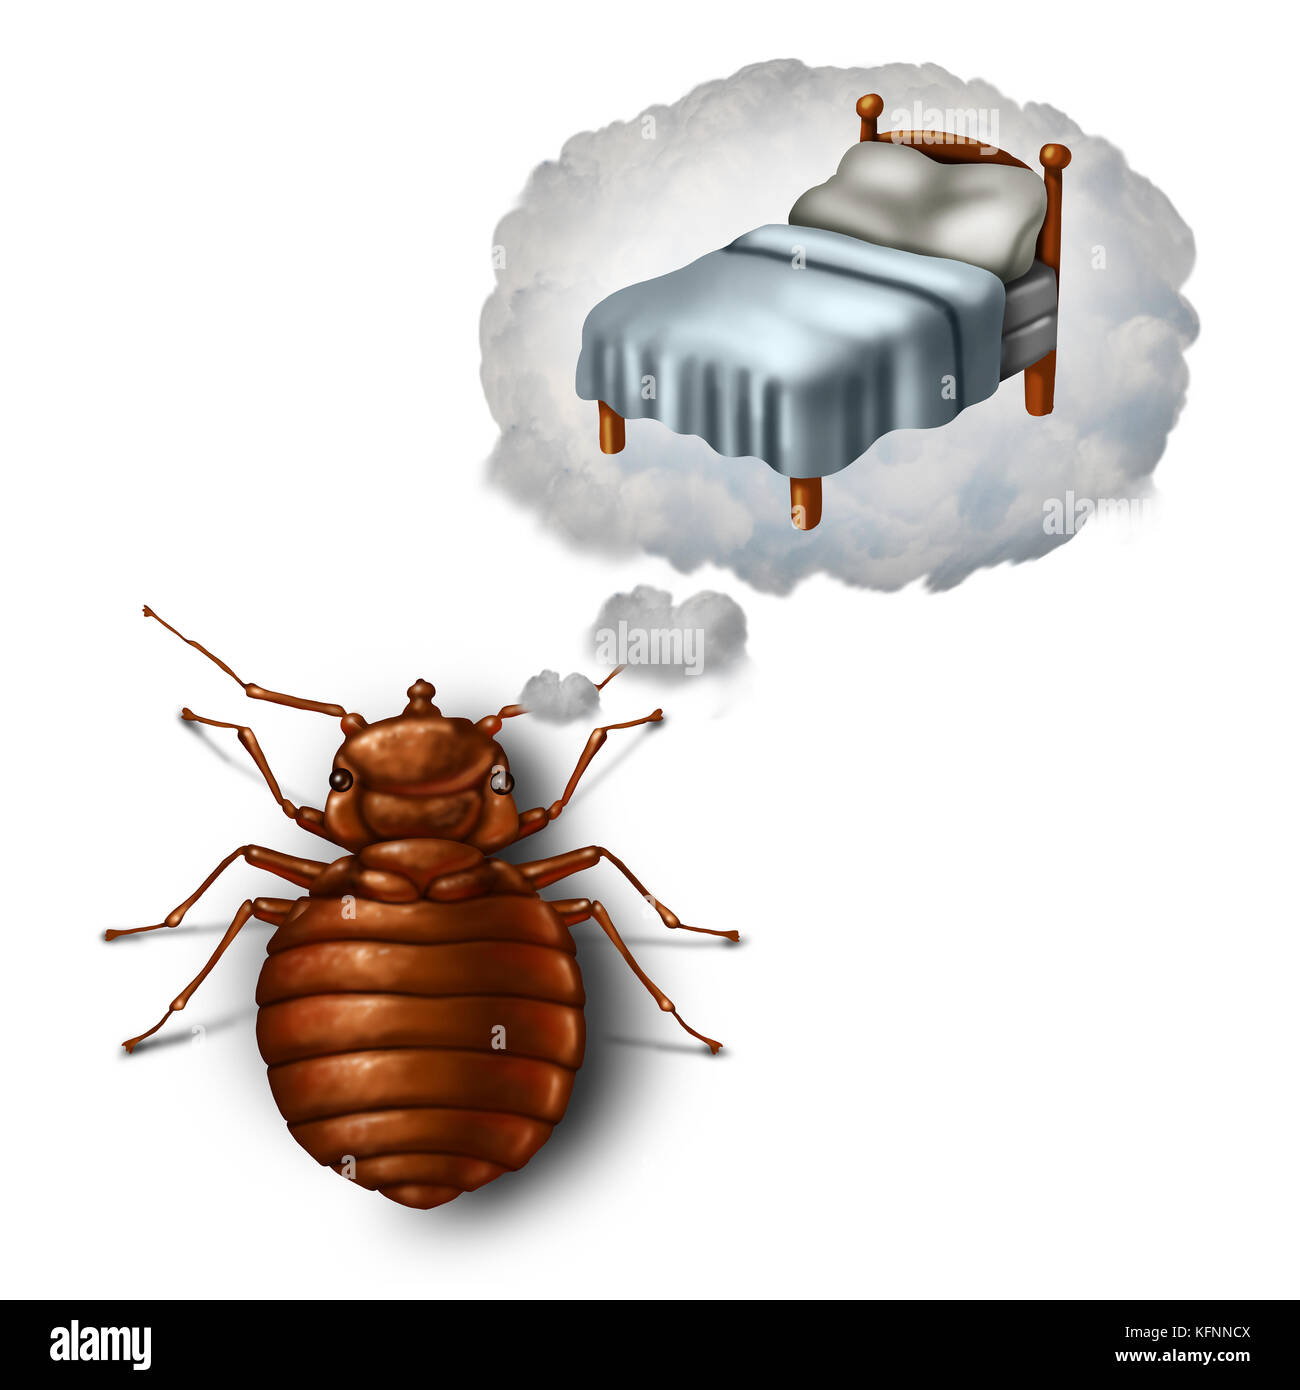 Bed bug dreaming or nightmare and bedbug worry concept as a parasitic insect pest imagining in a dream bubble a pillow and sheets as a symbol. Stock Photo